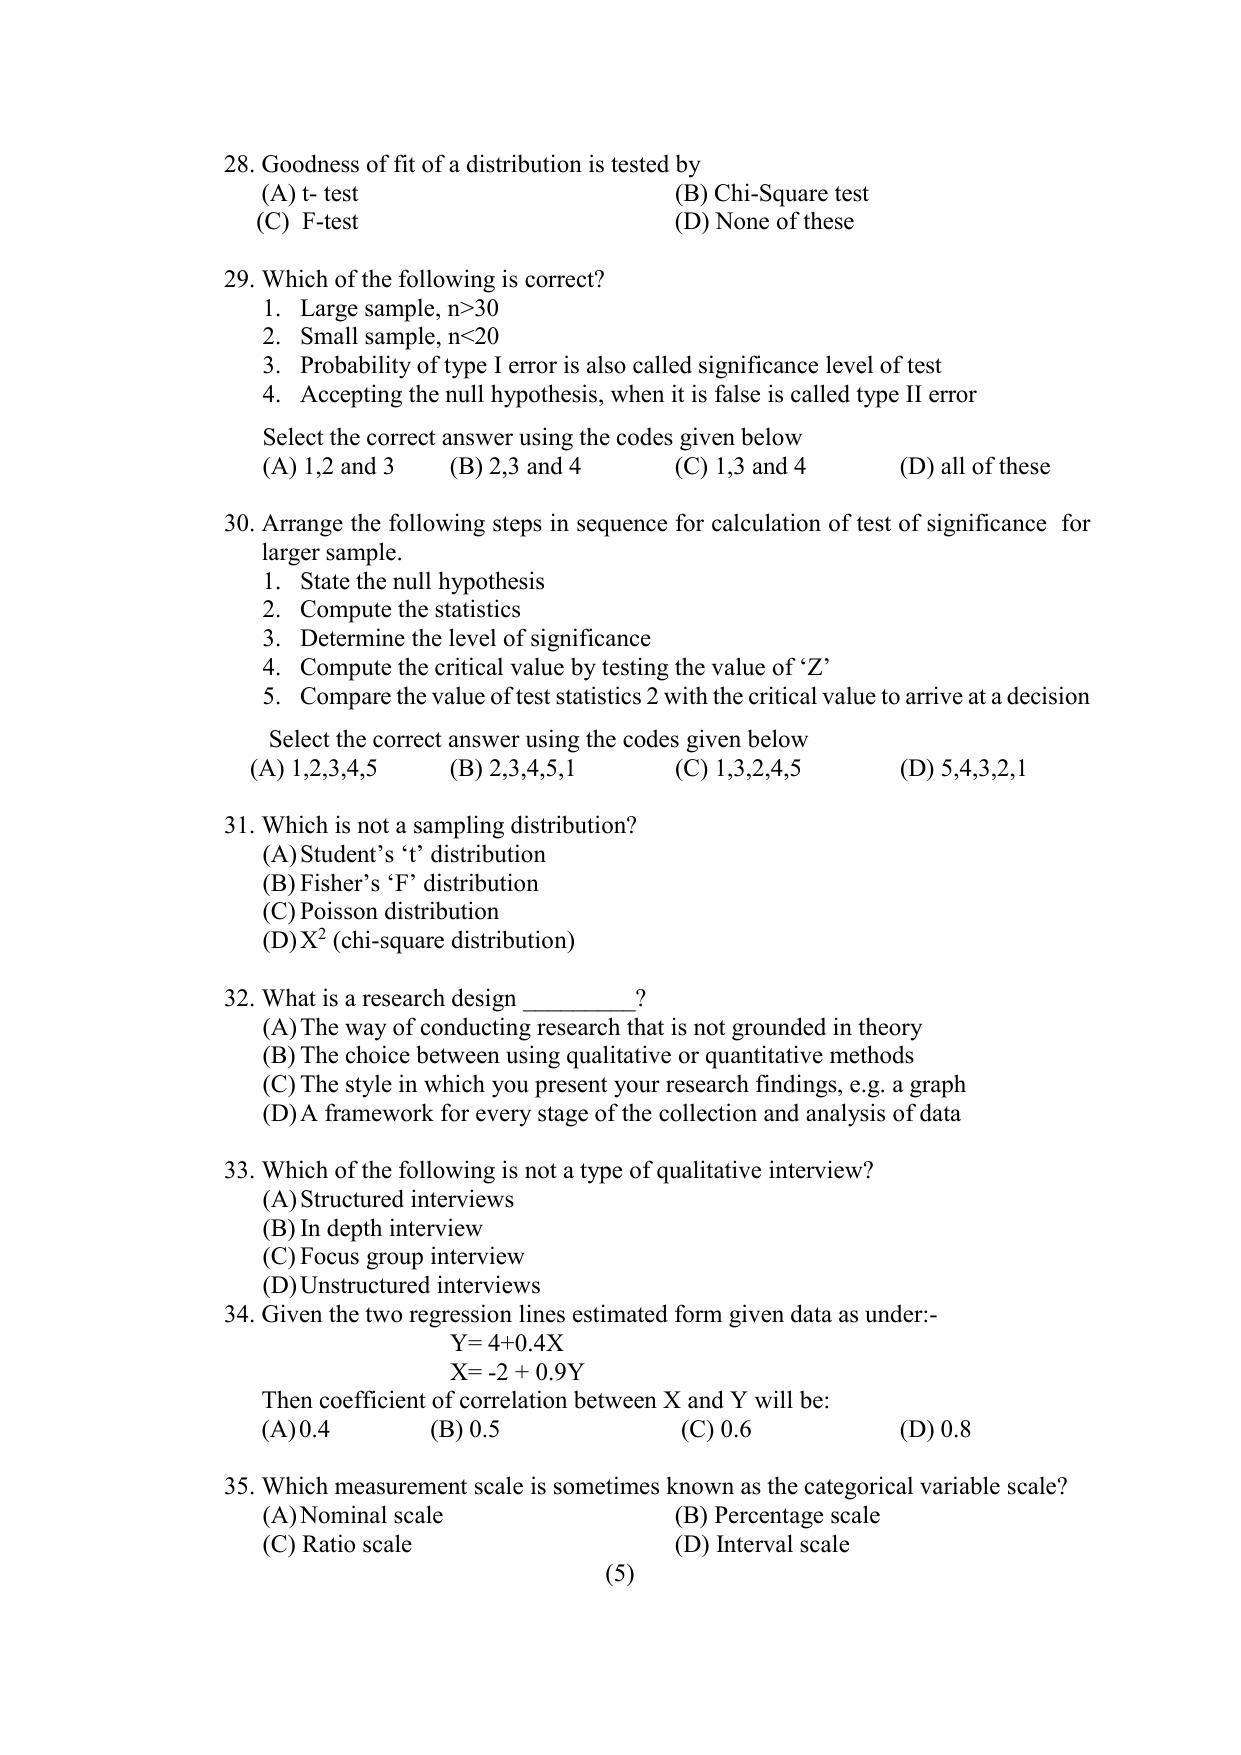 PU MPET Ancient Indian History & Archeology 2022 Question Papers - Page 10